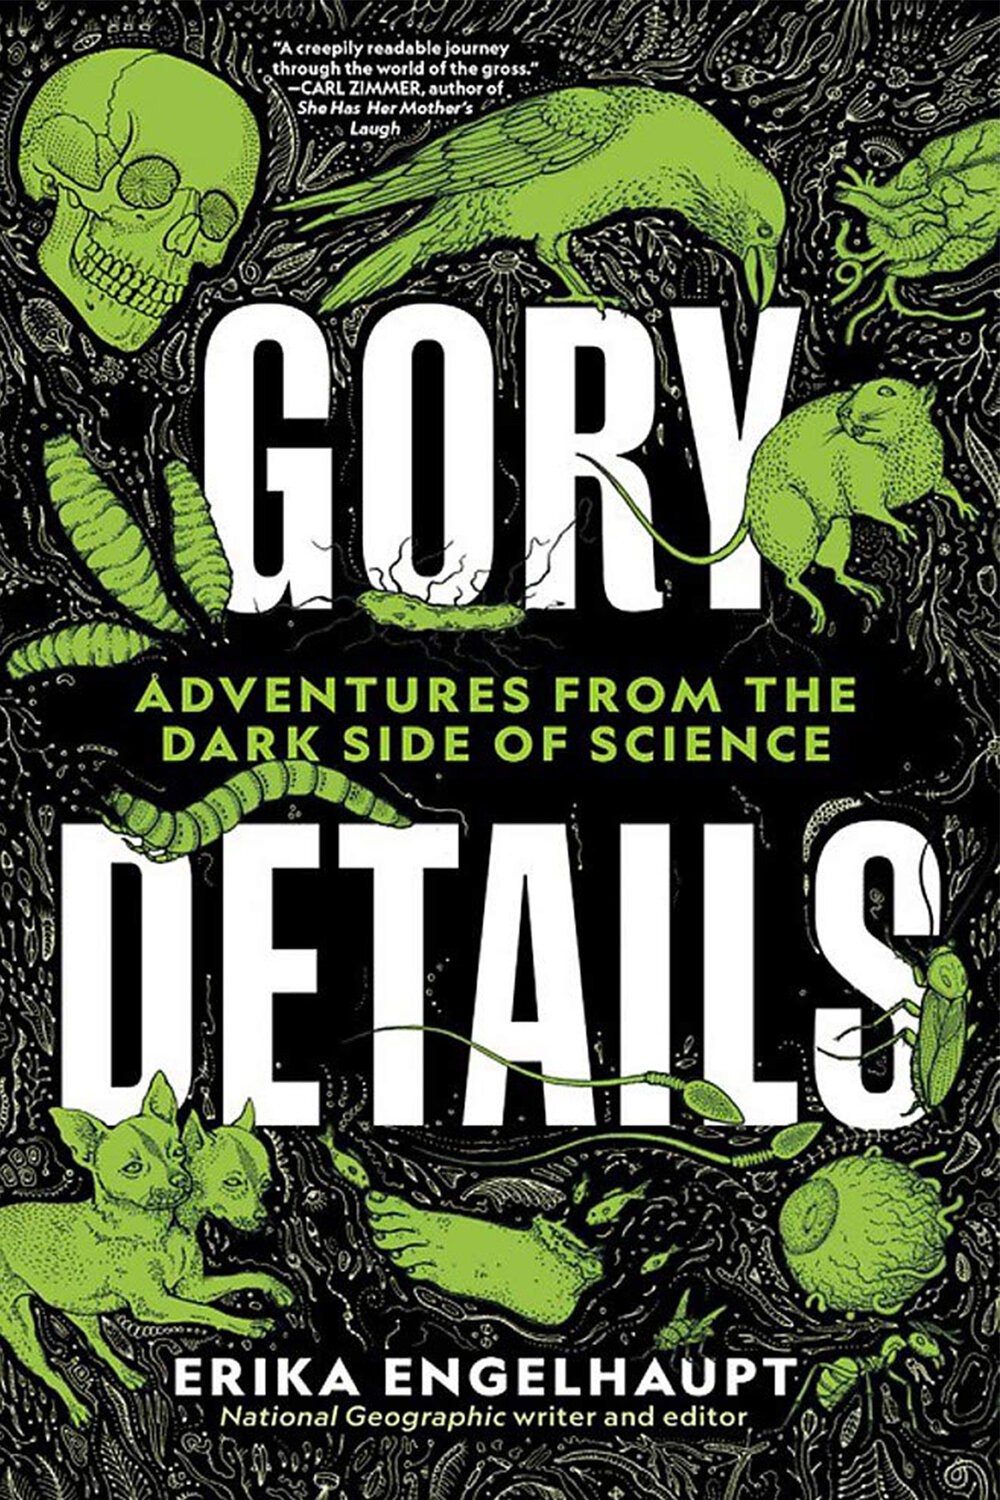 Gory Details: Adventures from the Dark Side of Science by Erika Engelhaupt